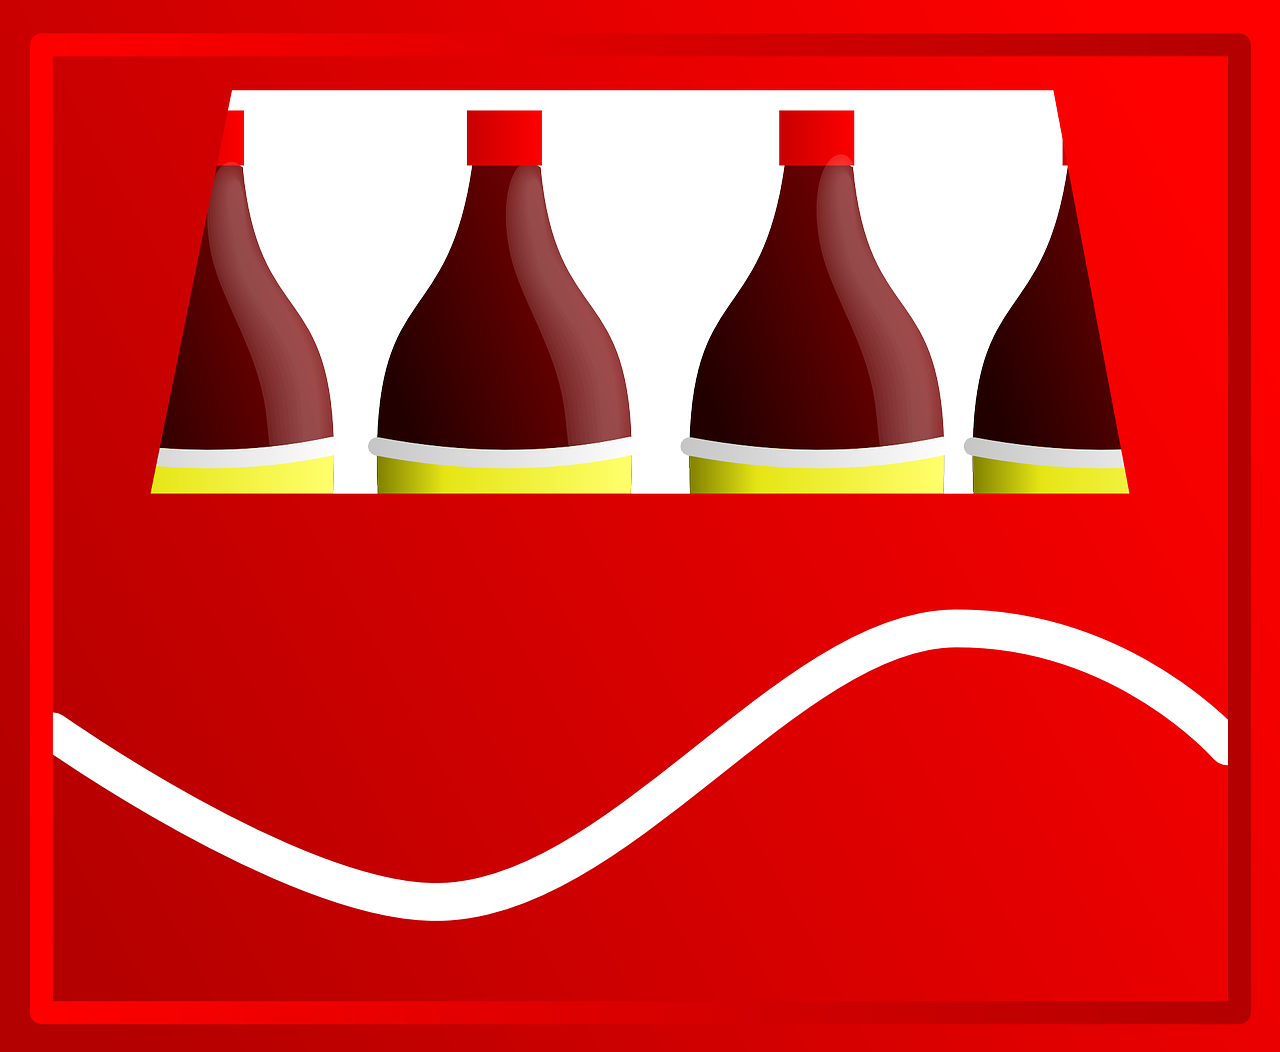 Free to use clipartix. Drink clipart soda